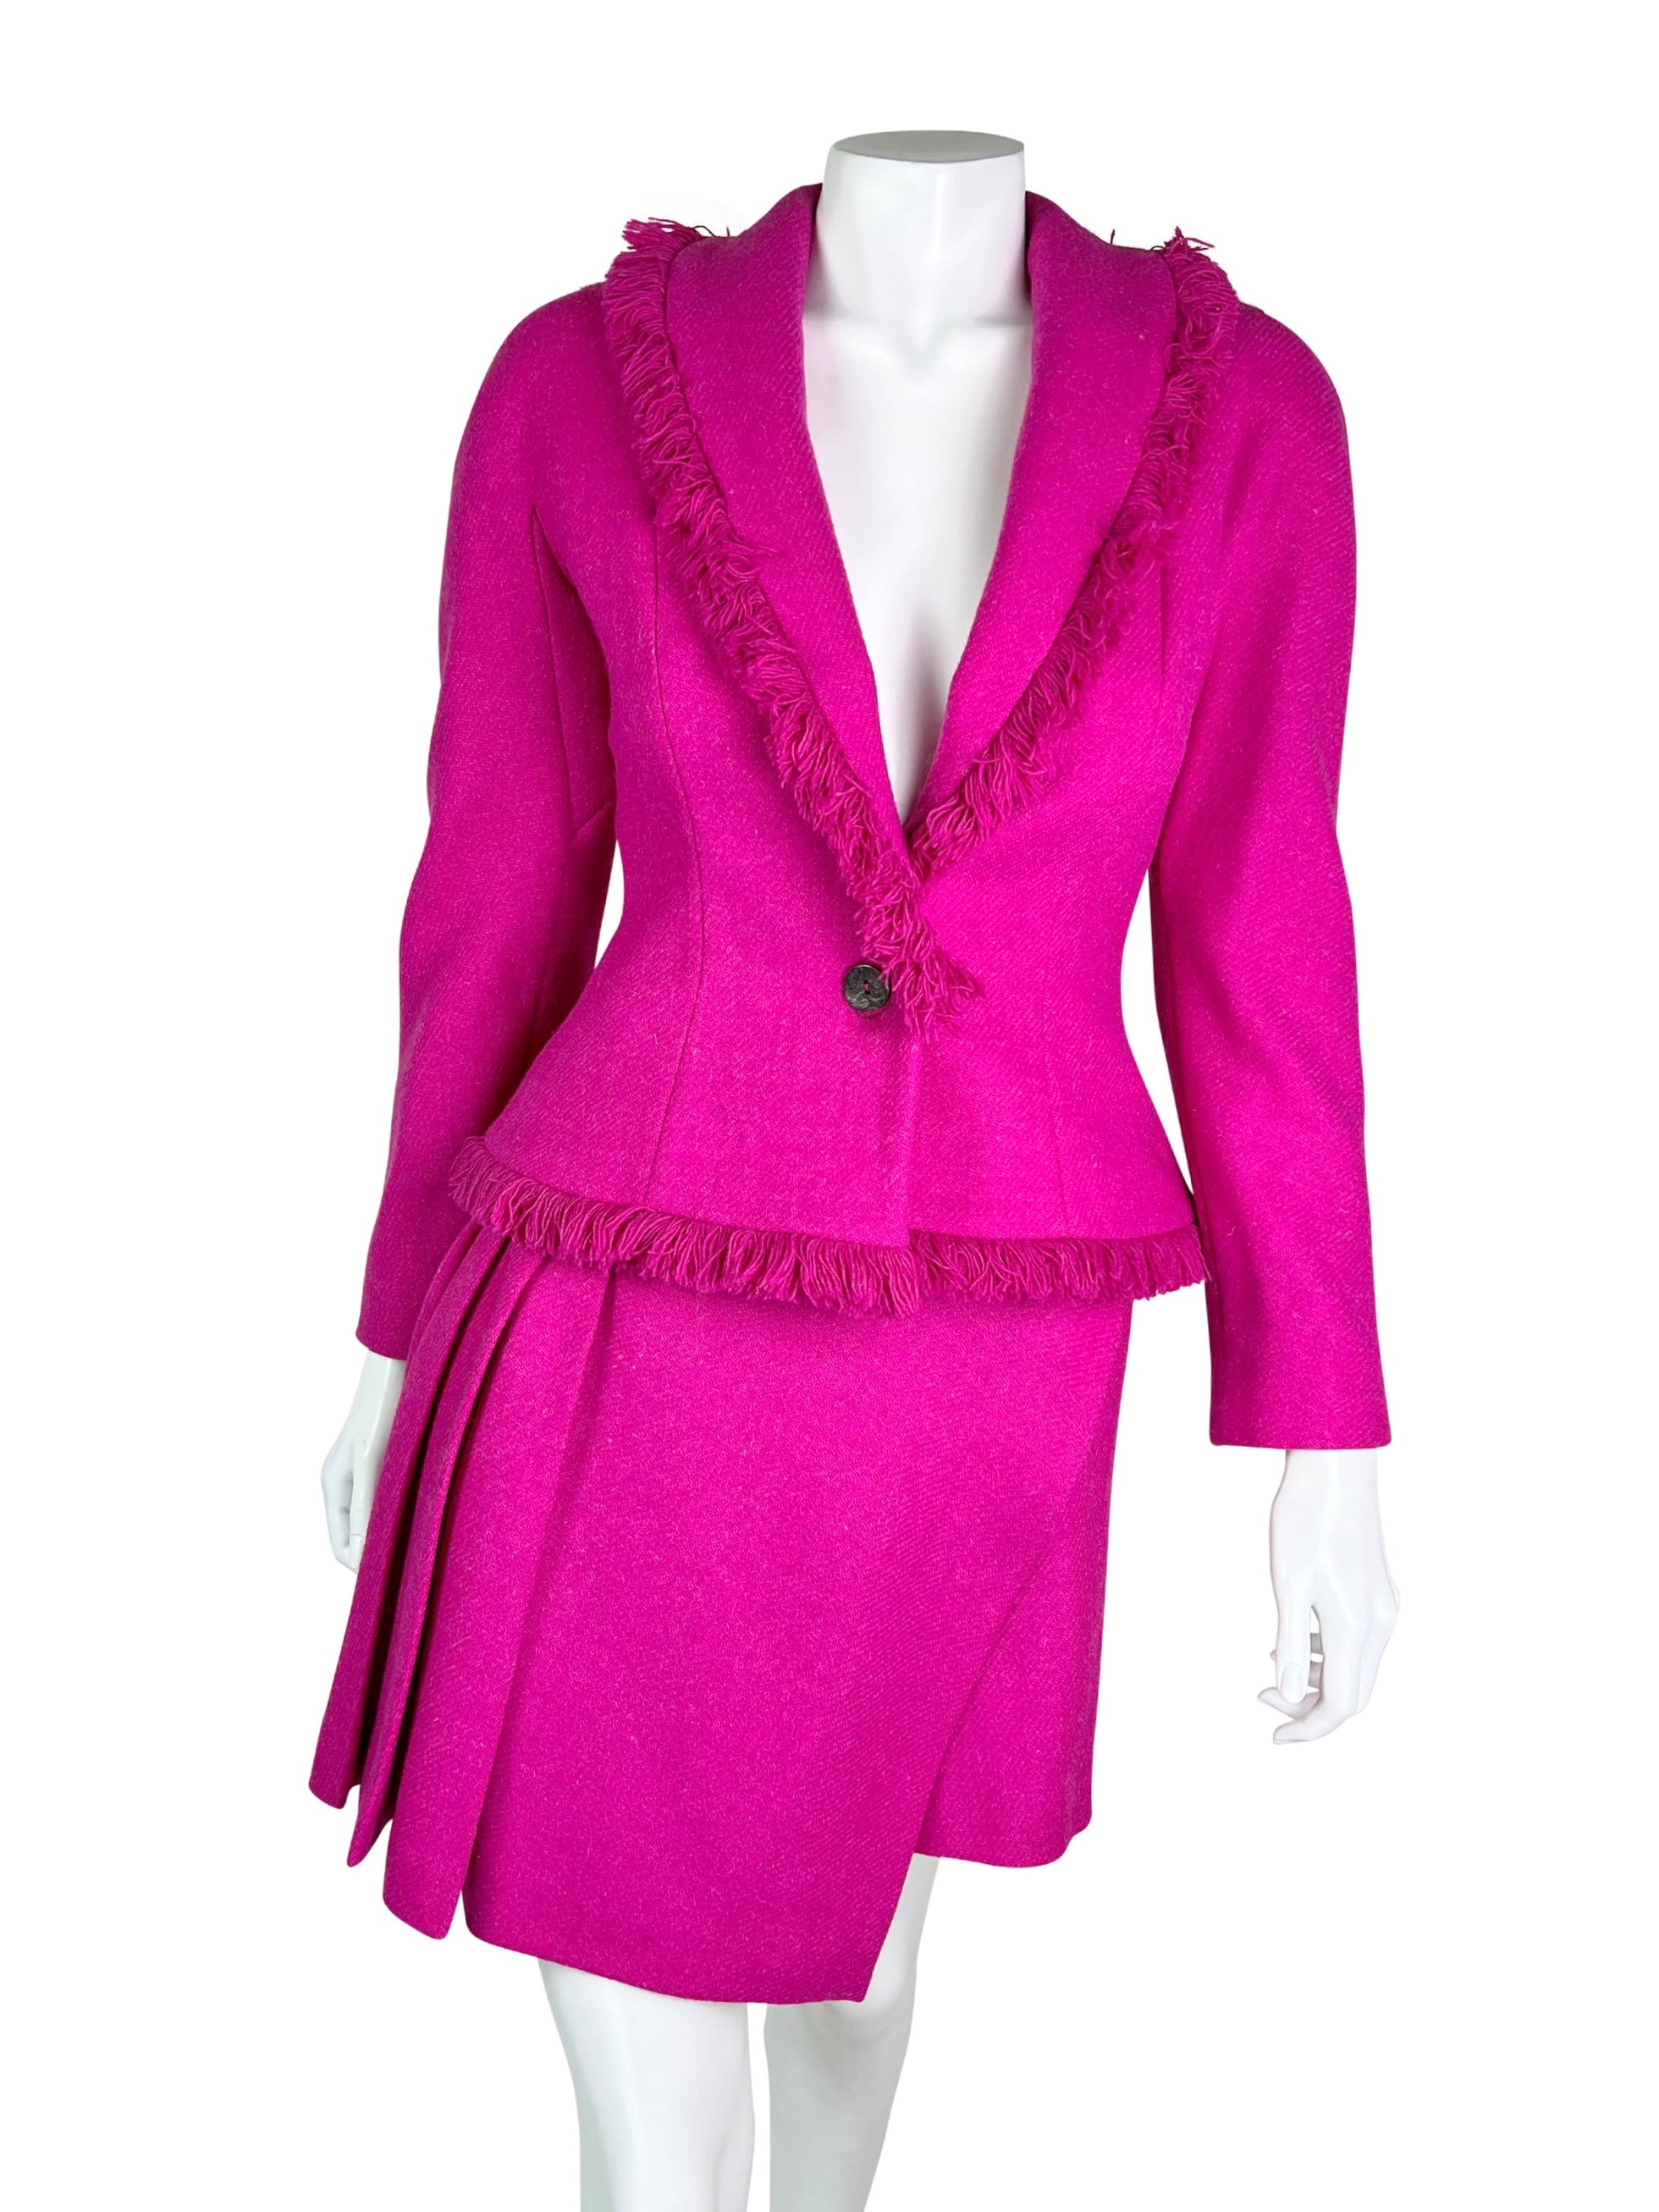 Vintage Christian Dior Hot Pink Silk Skirt Suit With Metallic Gold  Stitching  UK 12  The Velvet Pig